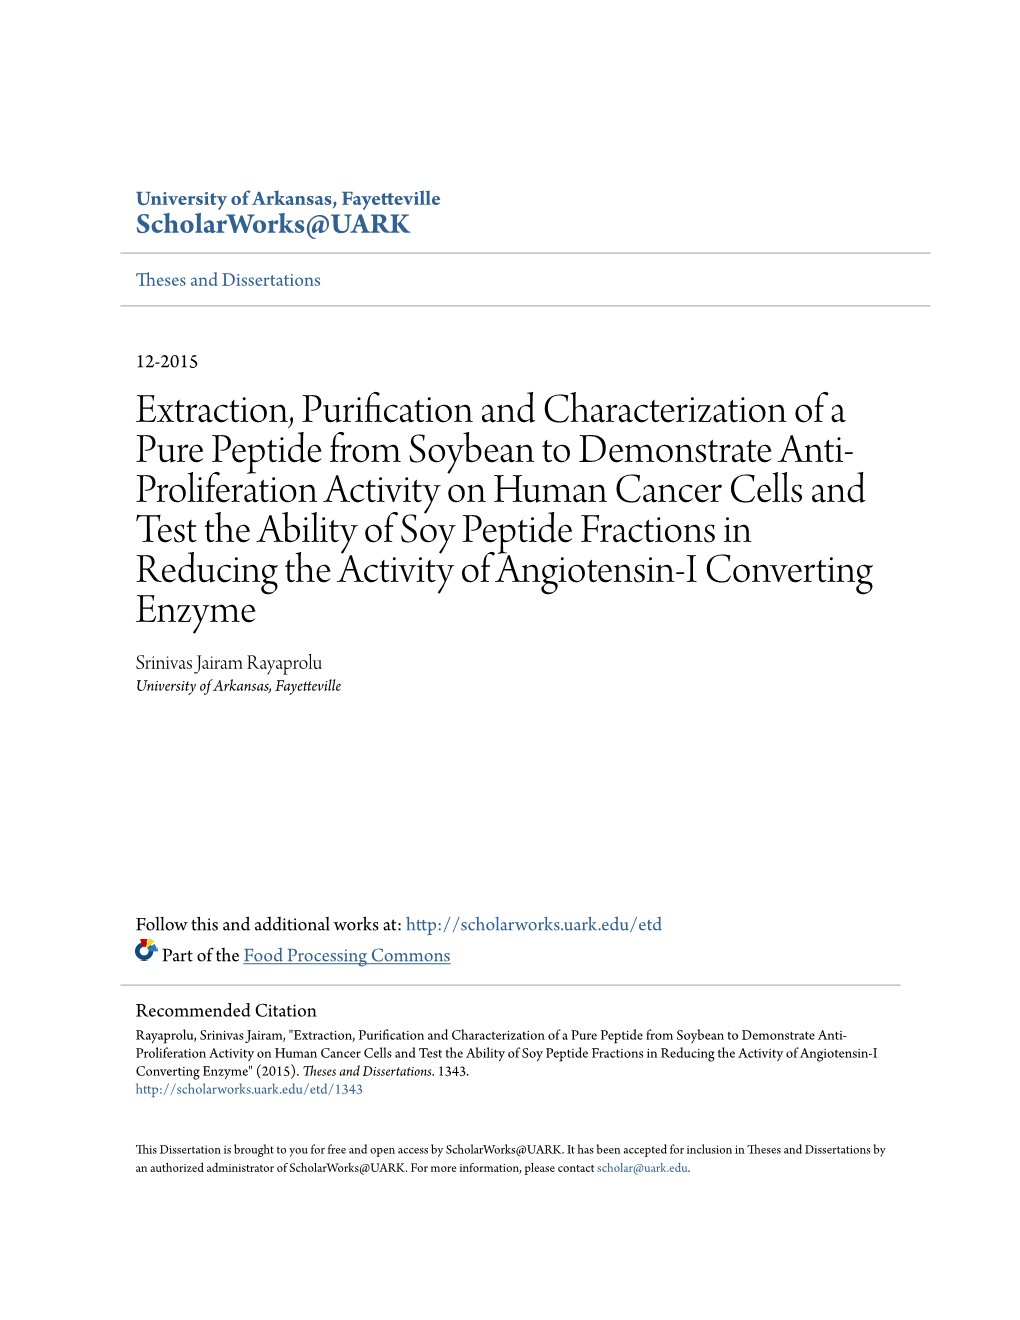 Extraction, Purification and Characterization of a Pure Peptide from Soybean to Demonstrate Anti-Proliferation Activity on Human